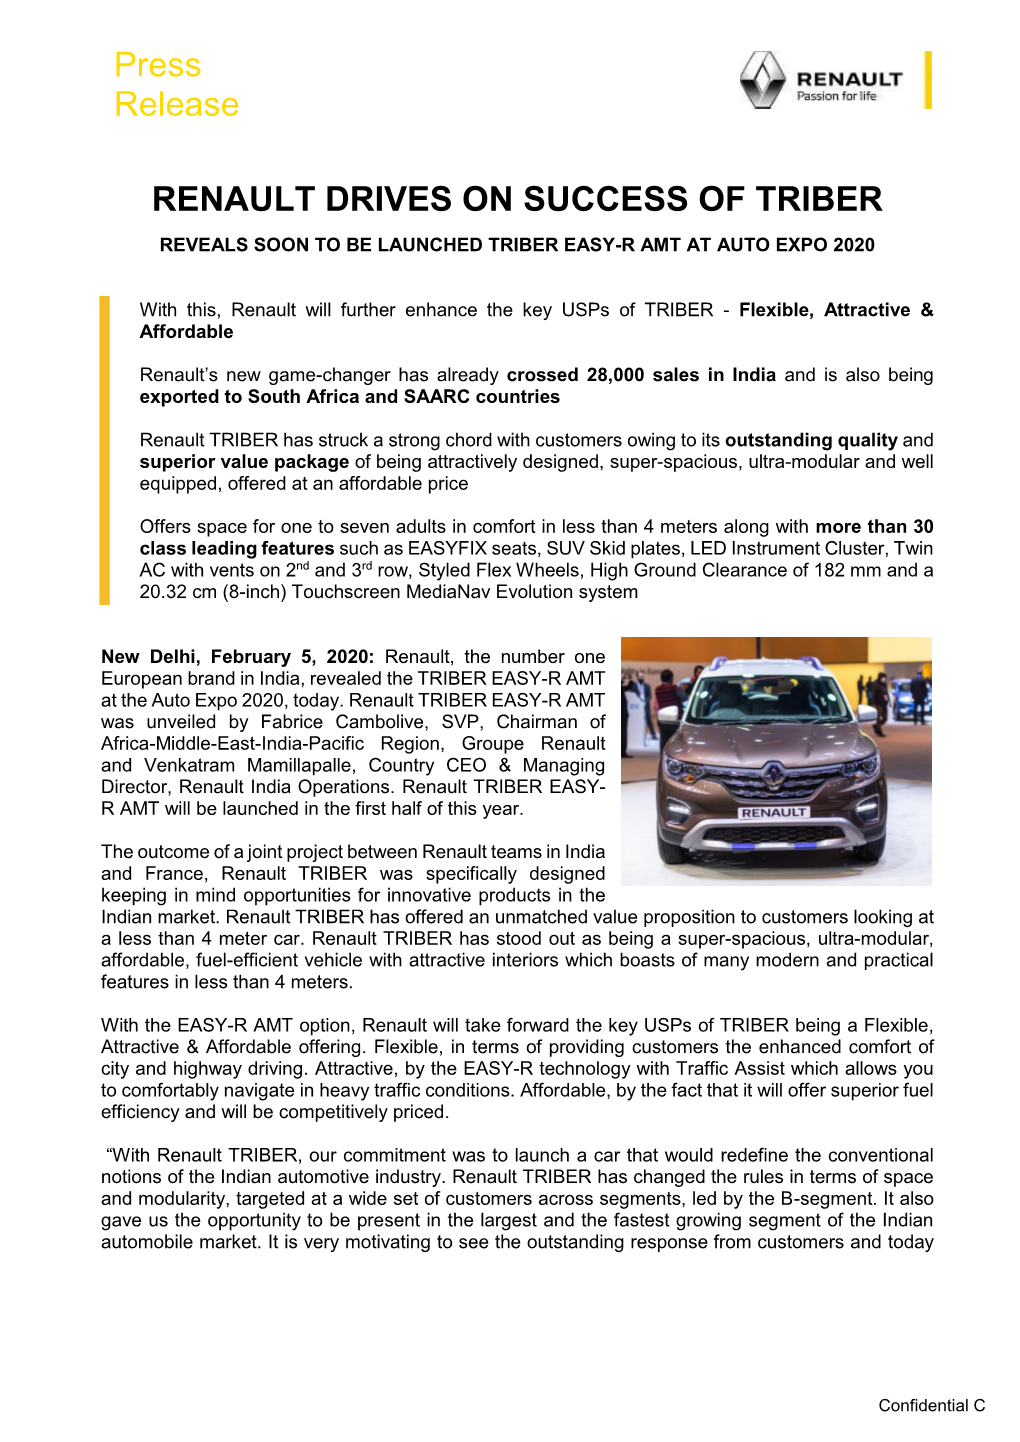 Press Release RENAULT DRIVES on SUCCESS of TRIBER